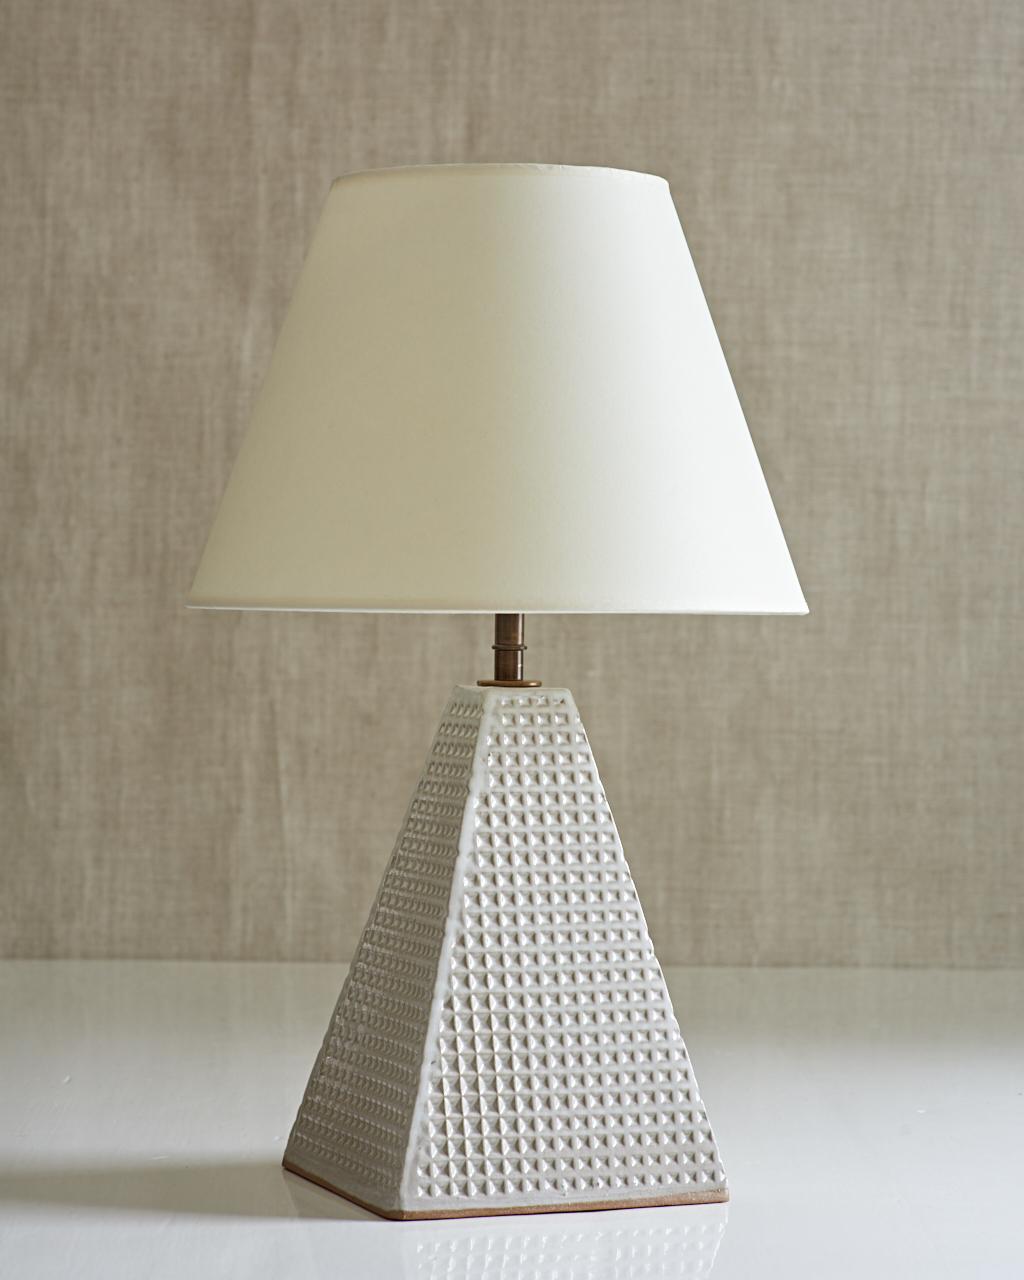 Handmade stoneware slab construction with waffle texture. Lamps are individually crafted and one of a kind.

White glaze with waffle texture. Antique brass fittings with braided black silk cord and off-white paper shade.

Measures: Steeple